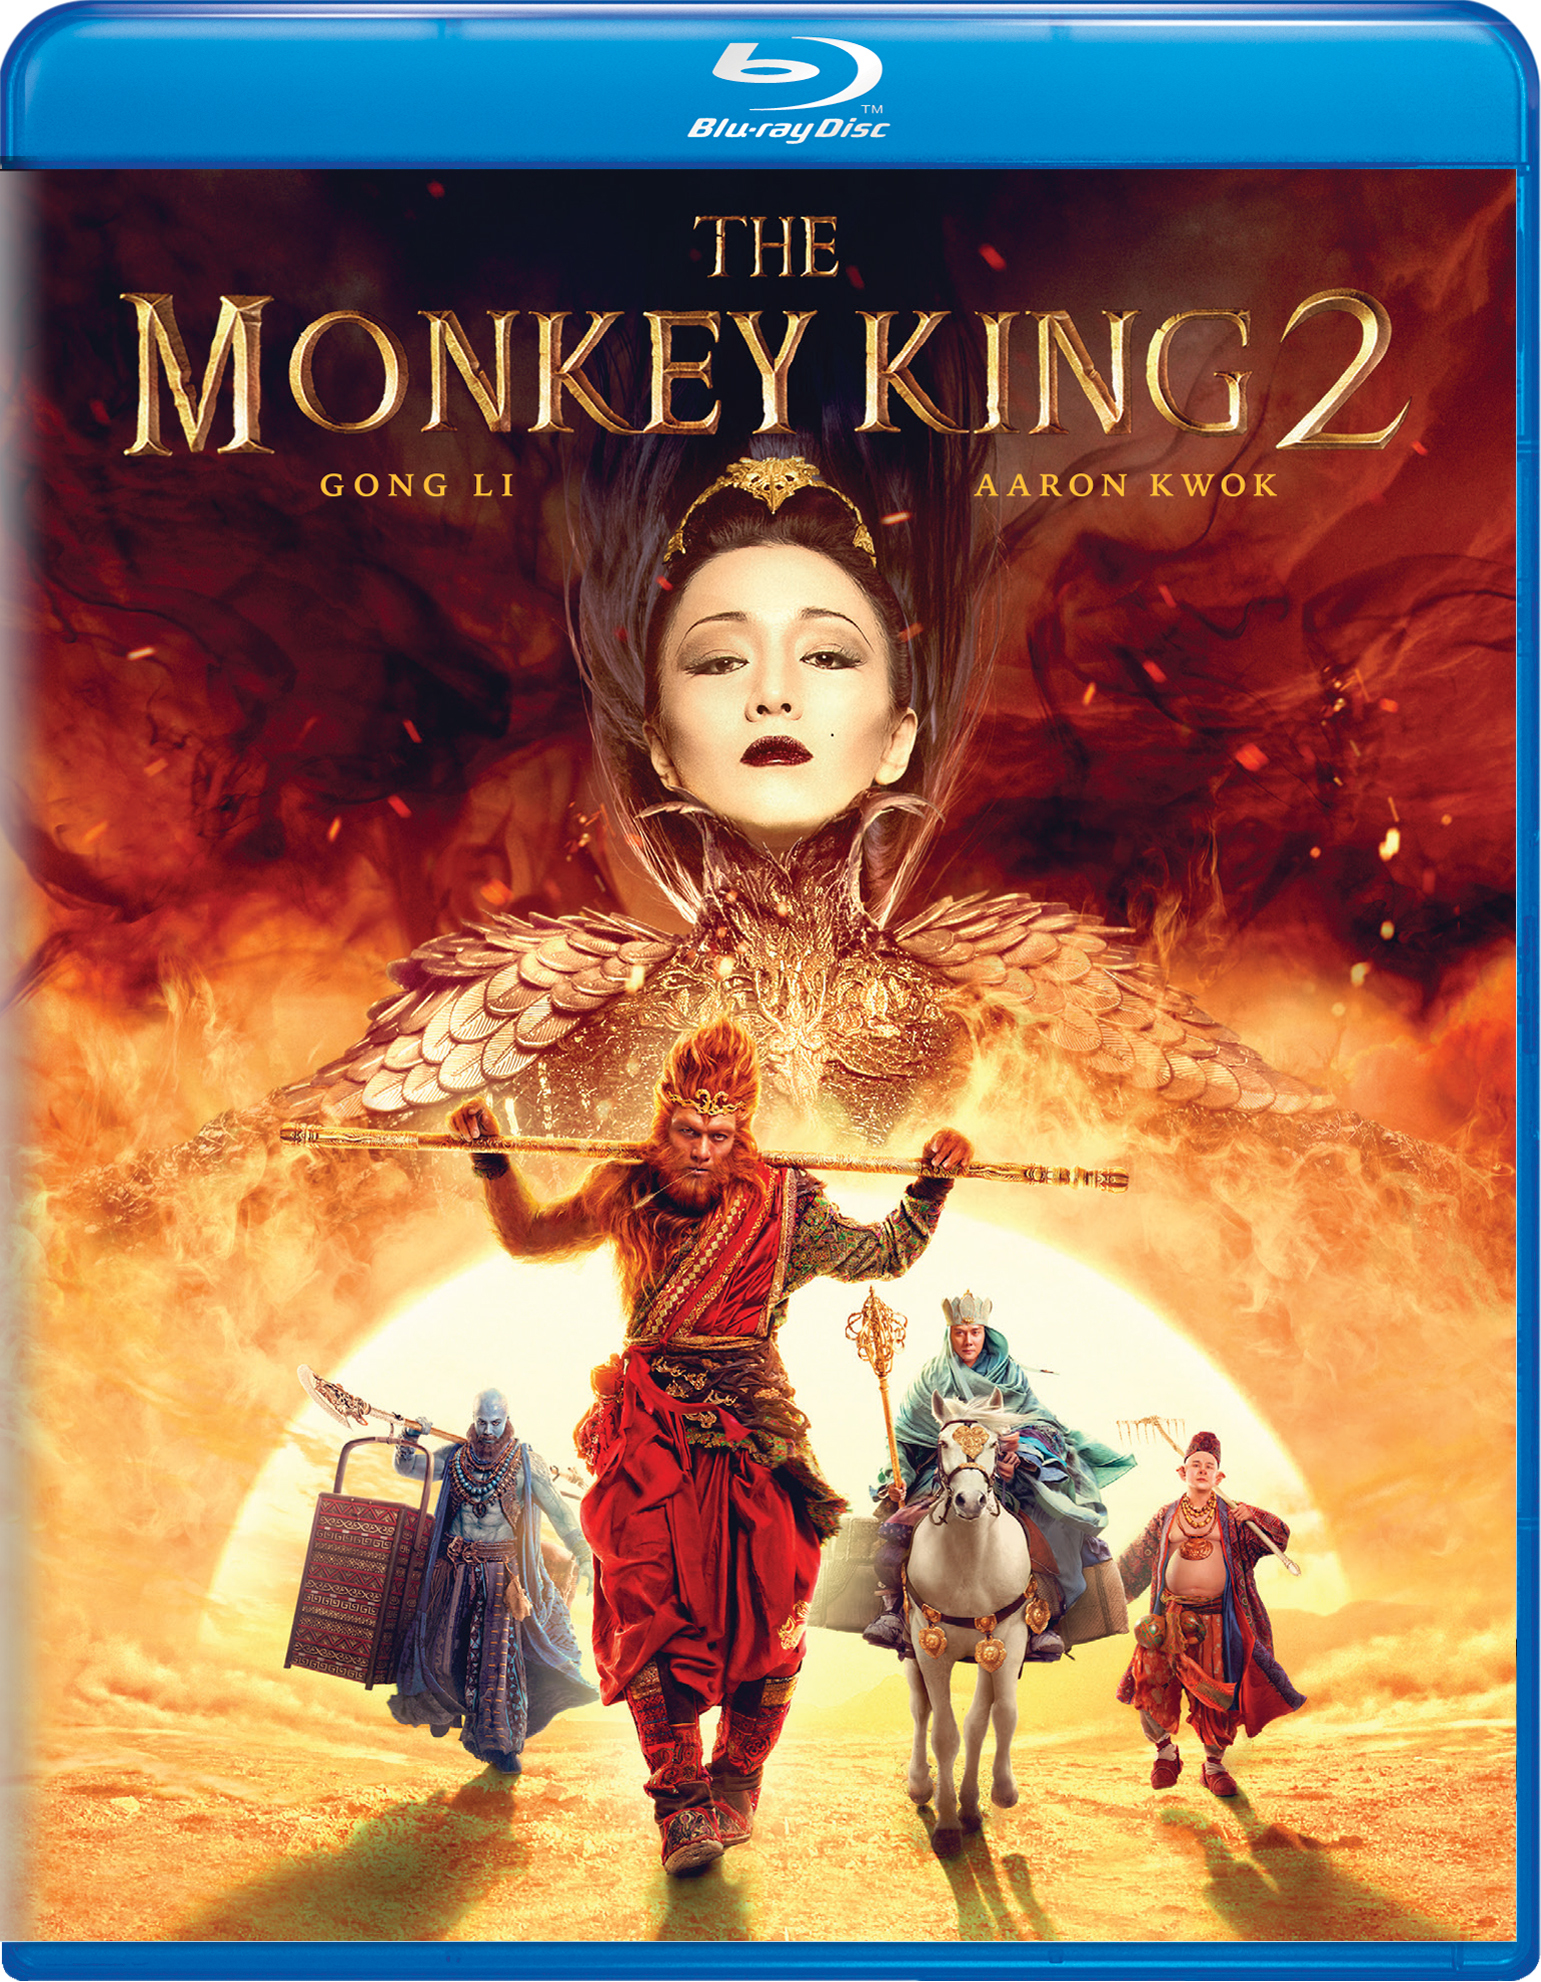 The Monkey King 2 - Blu-ray [ 2016 ]  - Foreign Movies On Blu-ray - Movies On GRUV